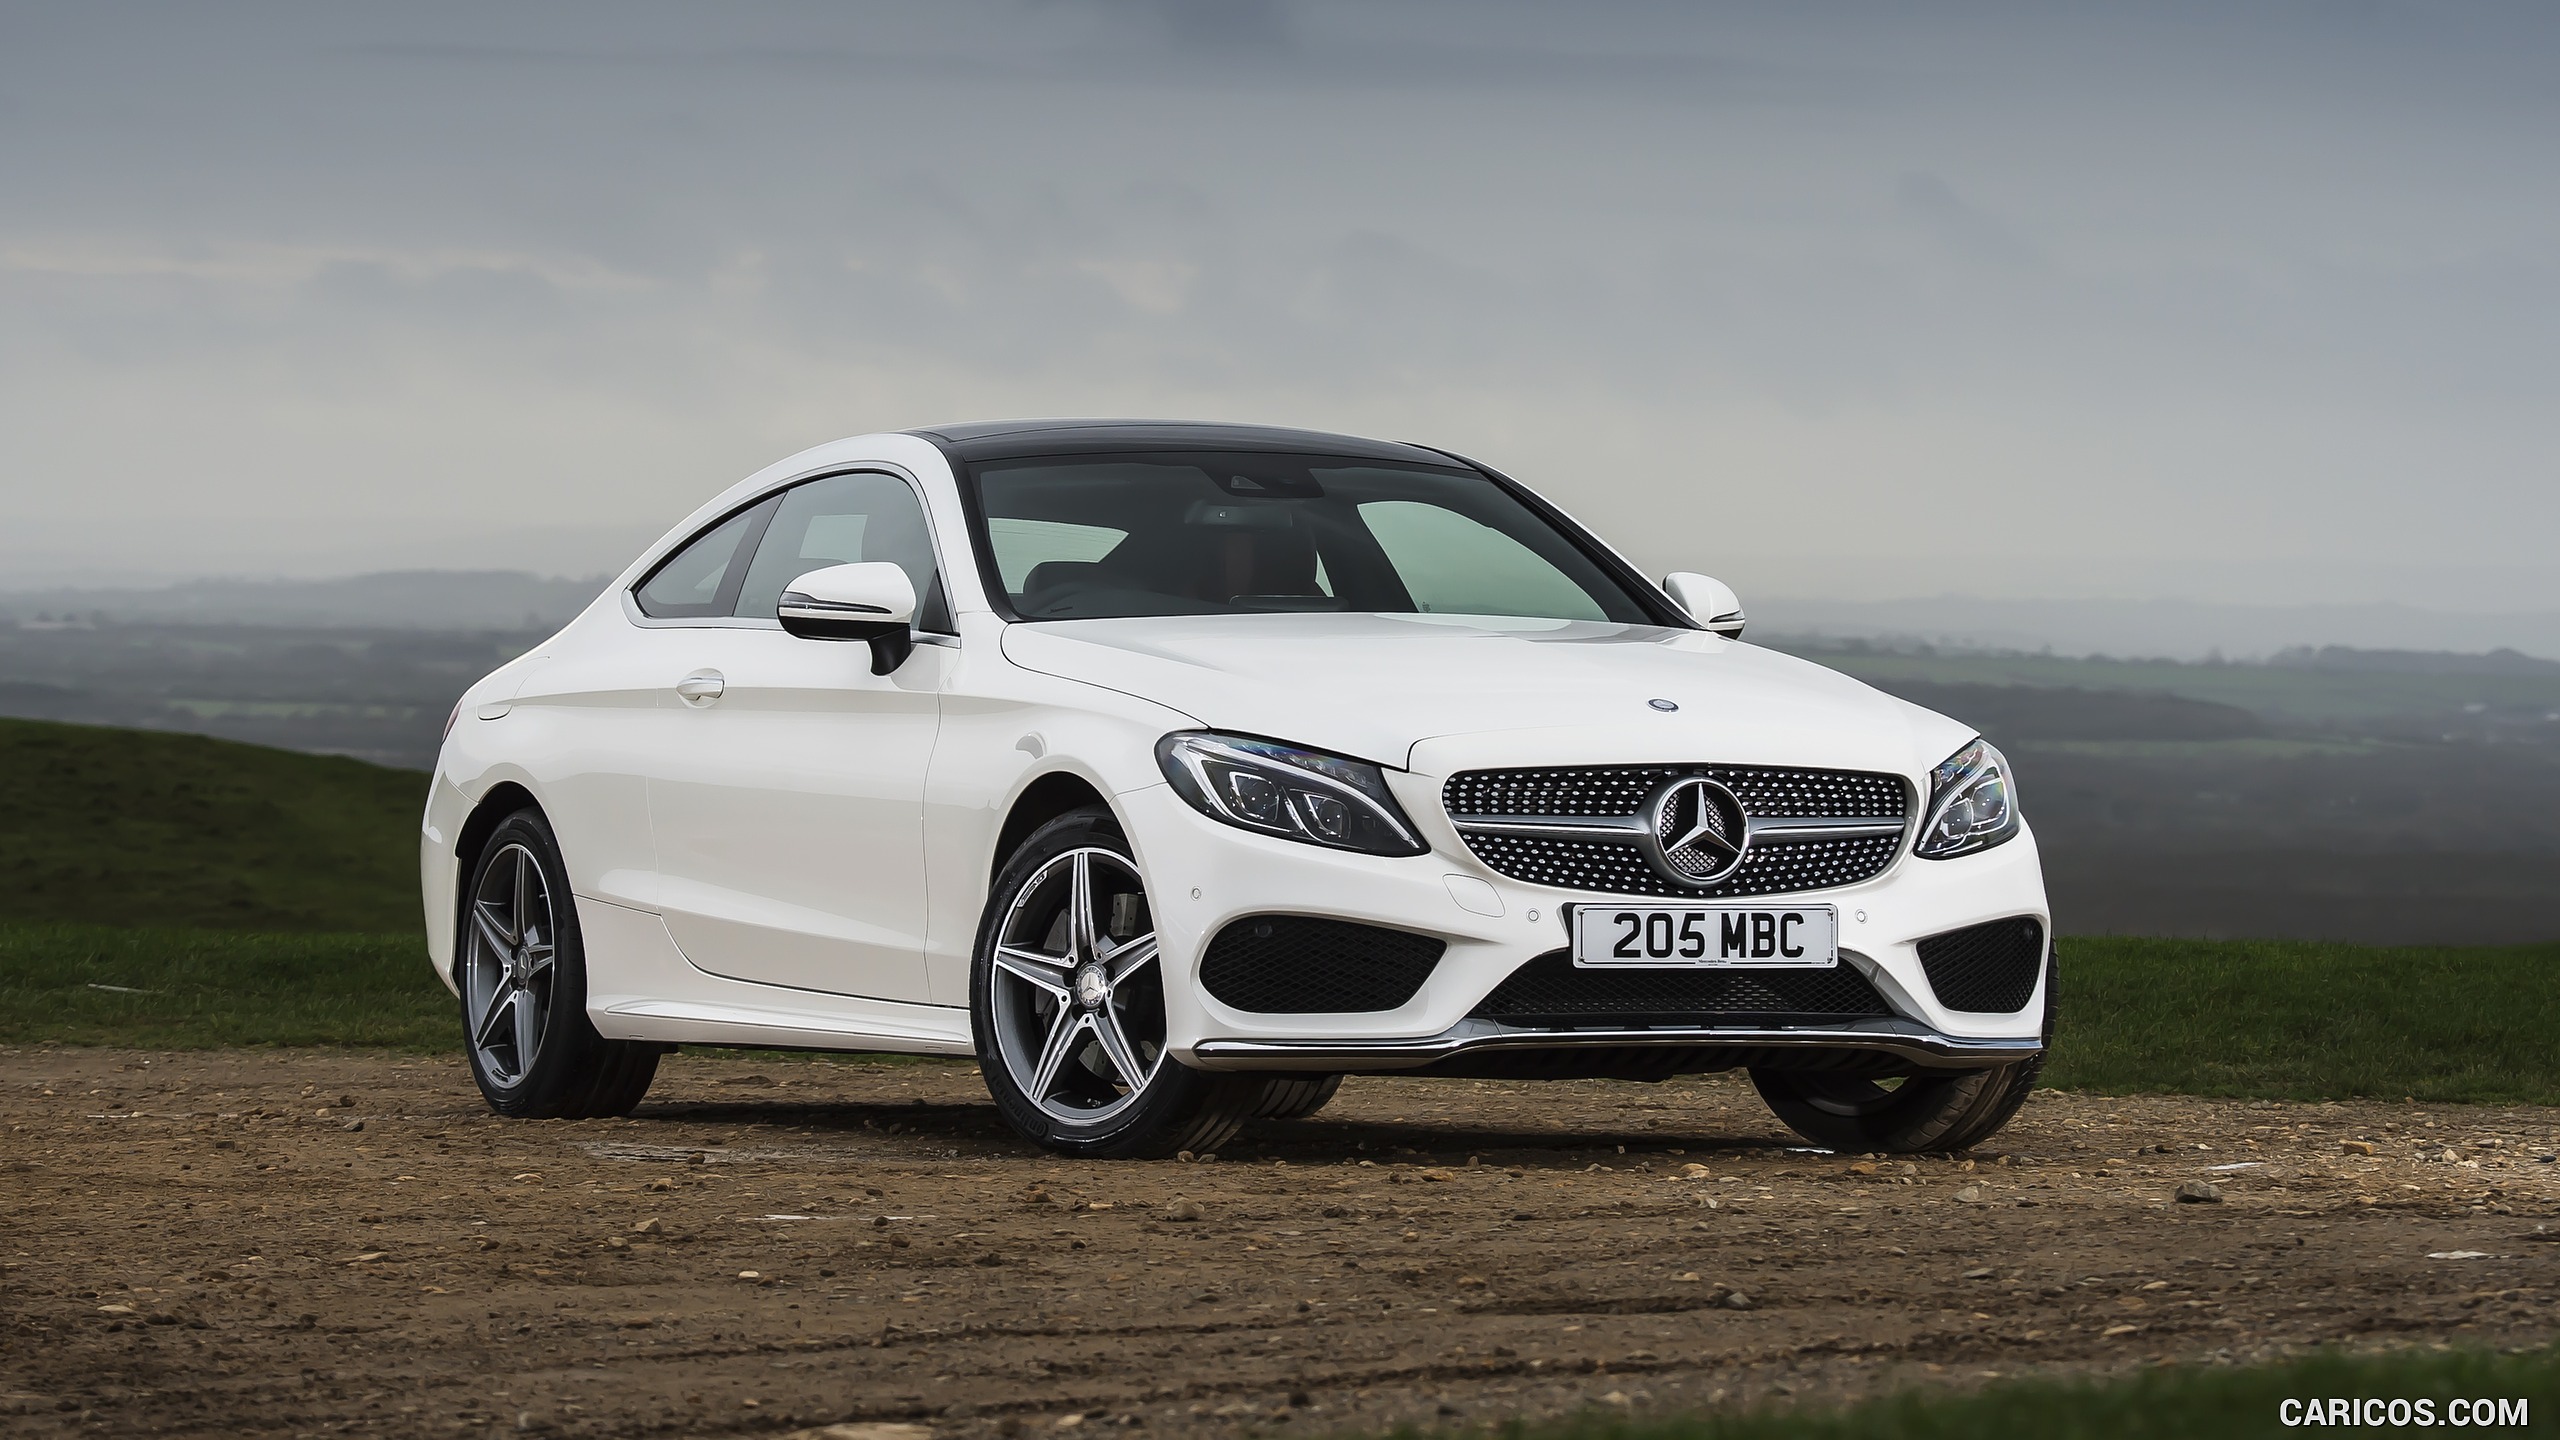 2017 Mercedes-Benz C-Class Coupe (UK-Spec) - Front, #105 of 210